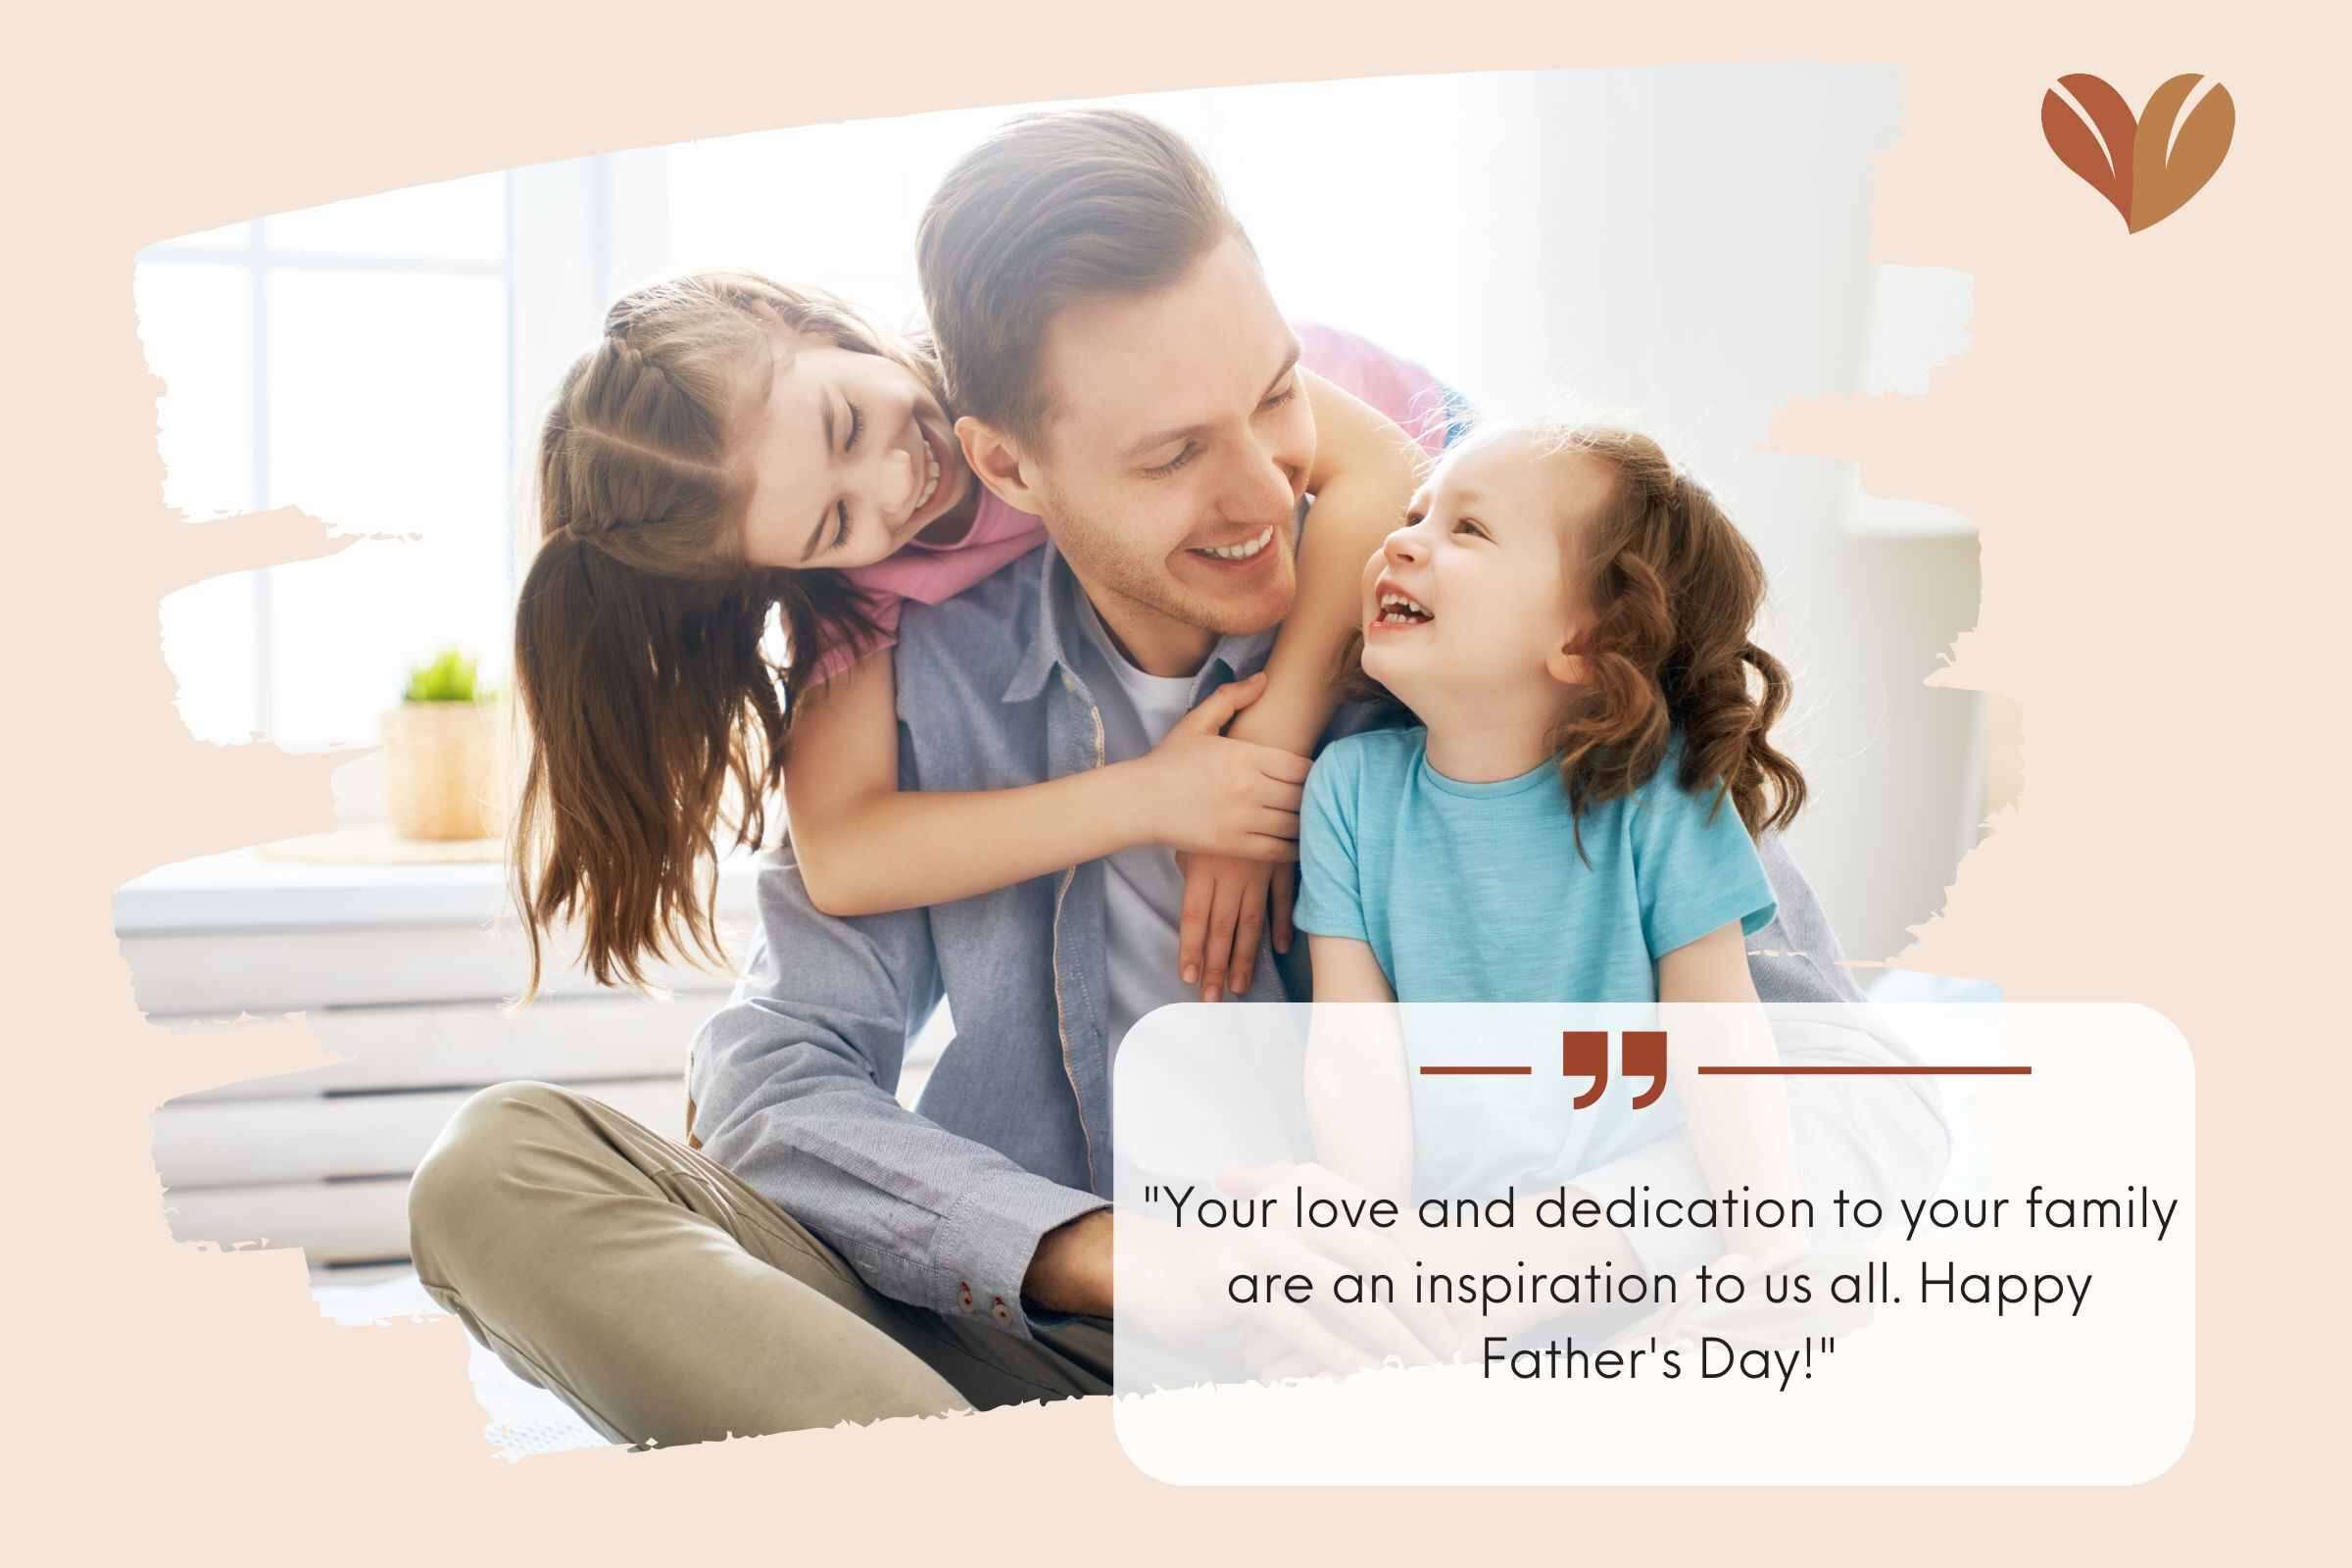 Inspirational Father's Day Messages For Father-In-Law